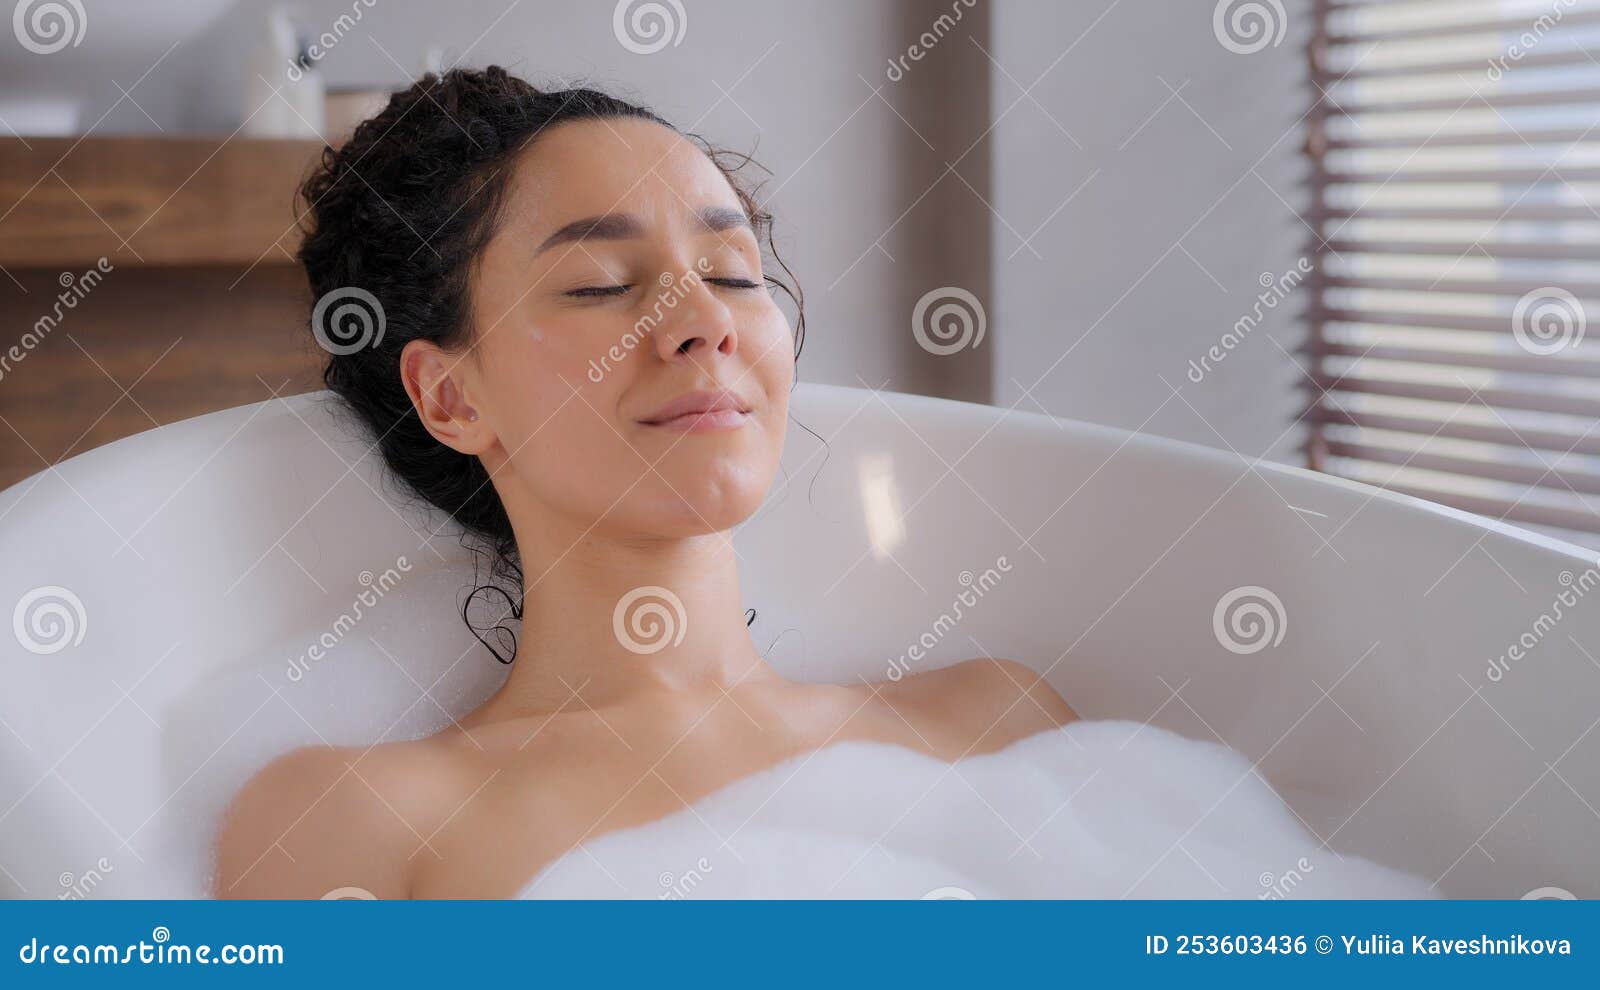 Close Up Young Attractive Relaxed Woman Lying In Hot Foam Bath With Eyes Closed Resting Relaxing 